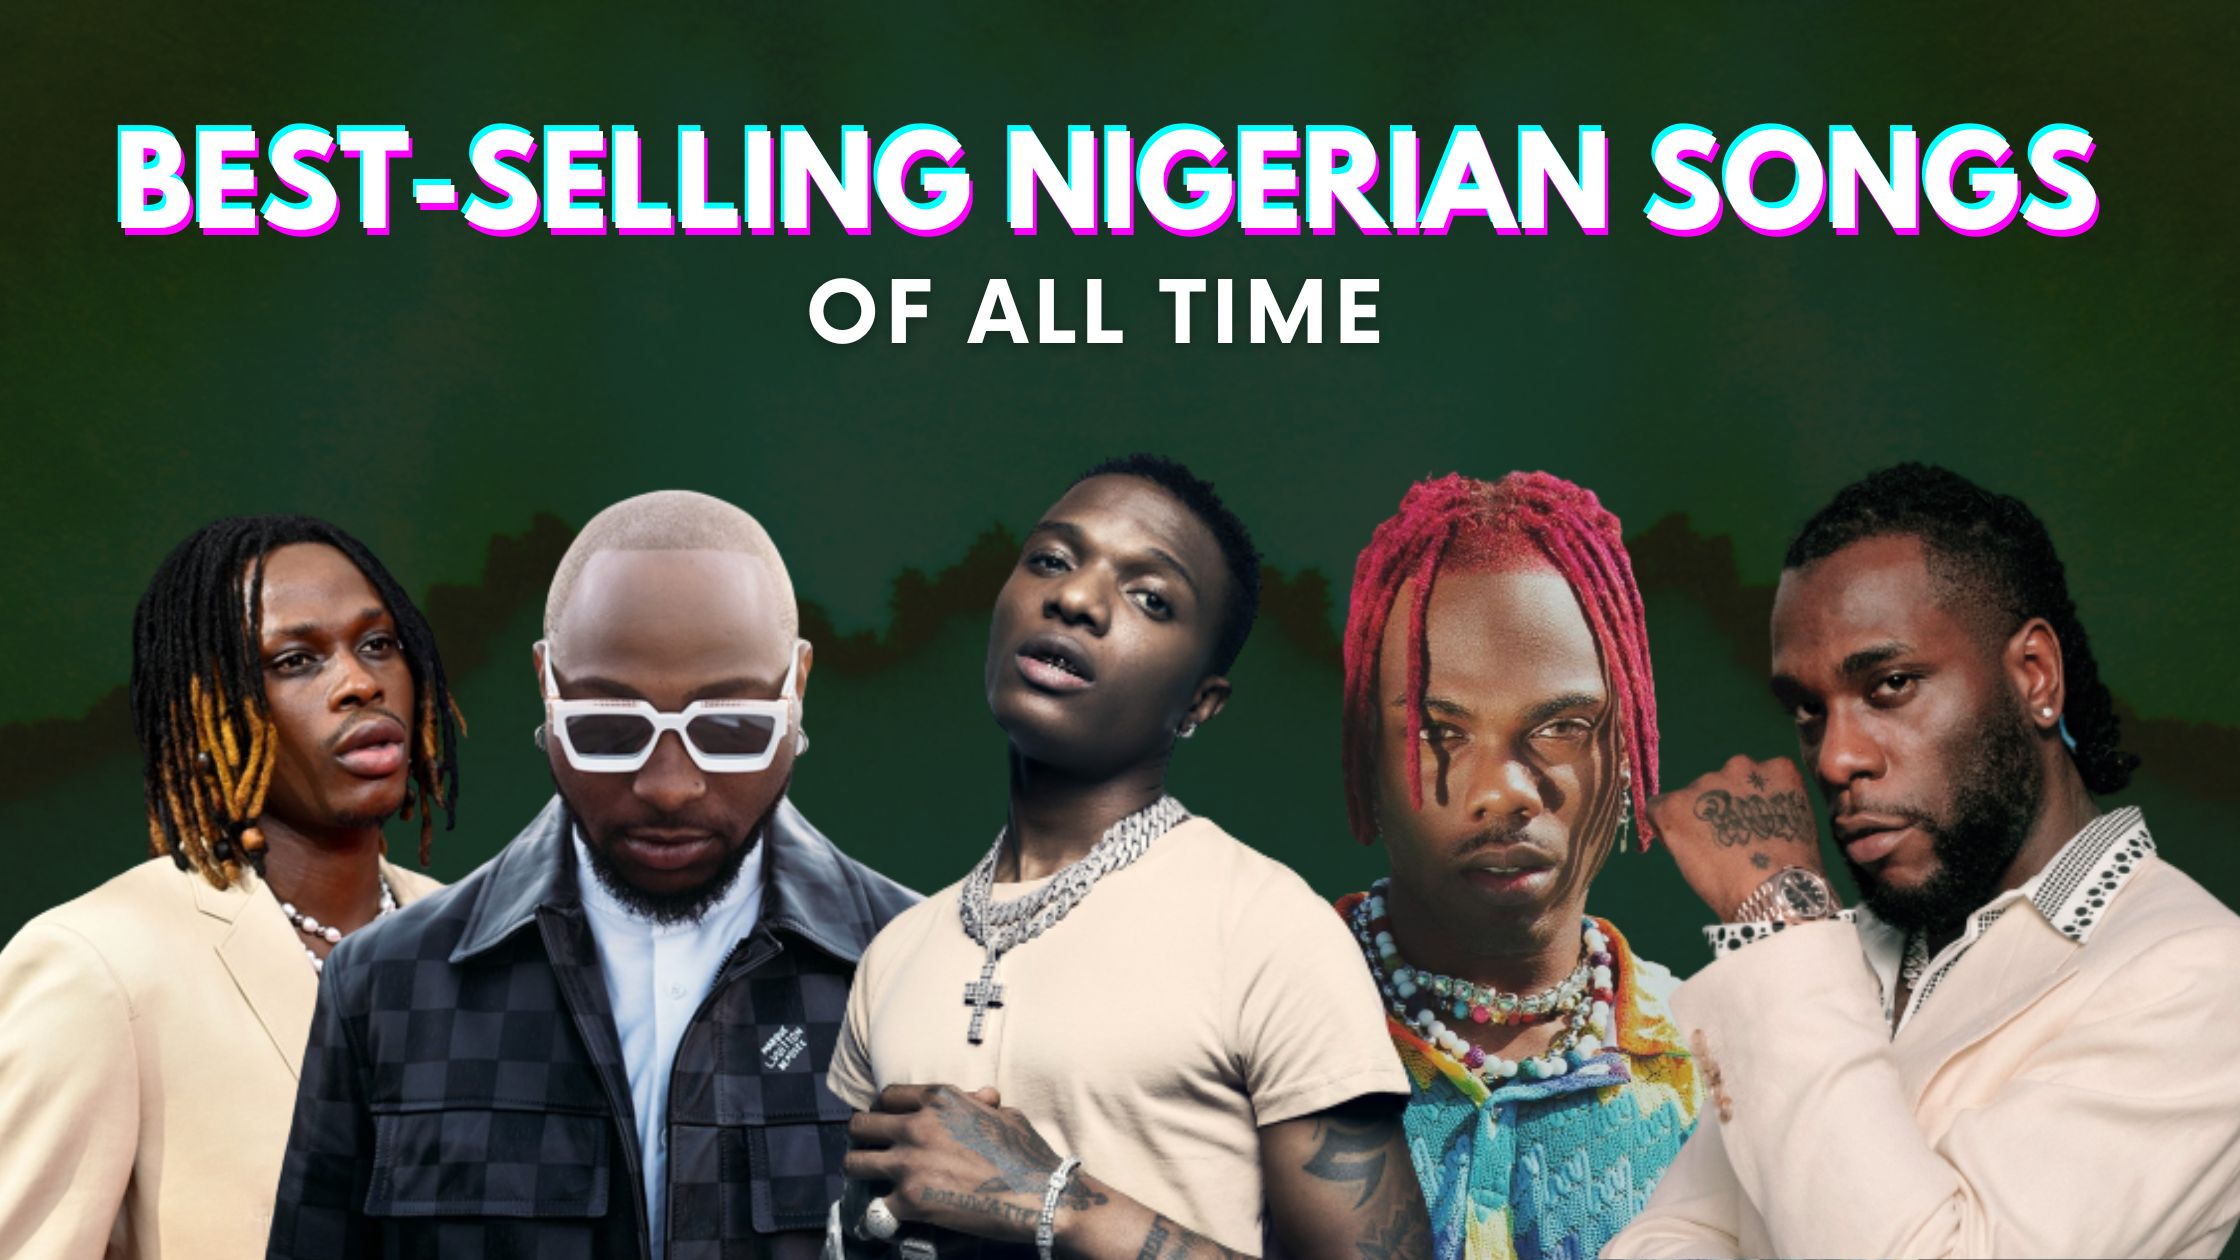 Top 10 Best-Selling Nigerian Songs Of All Time